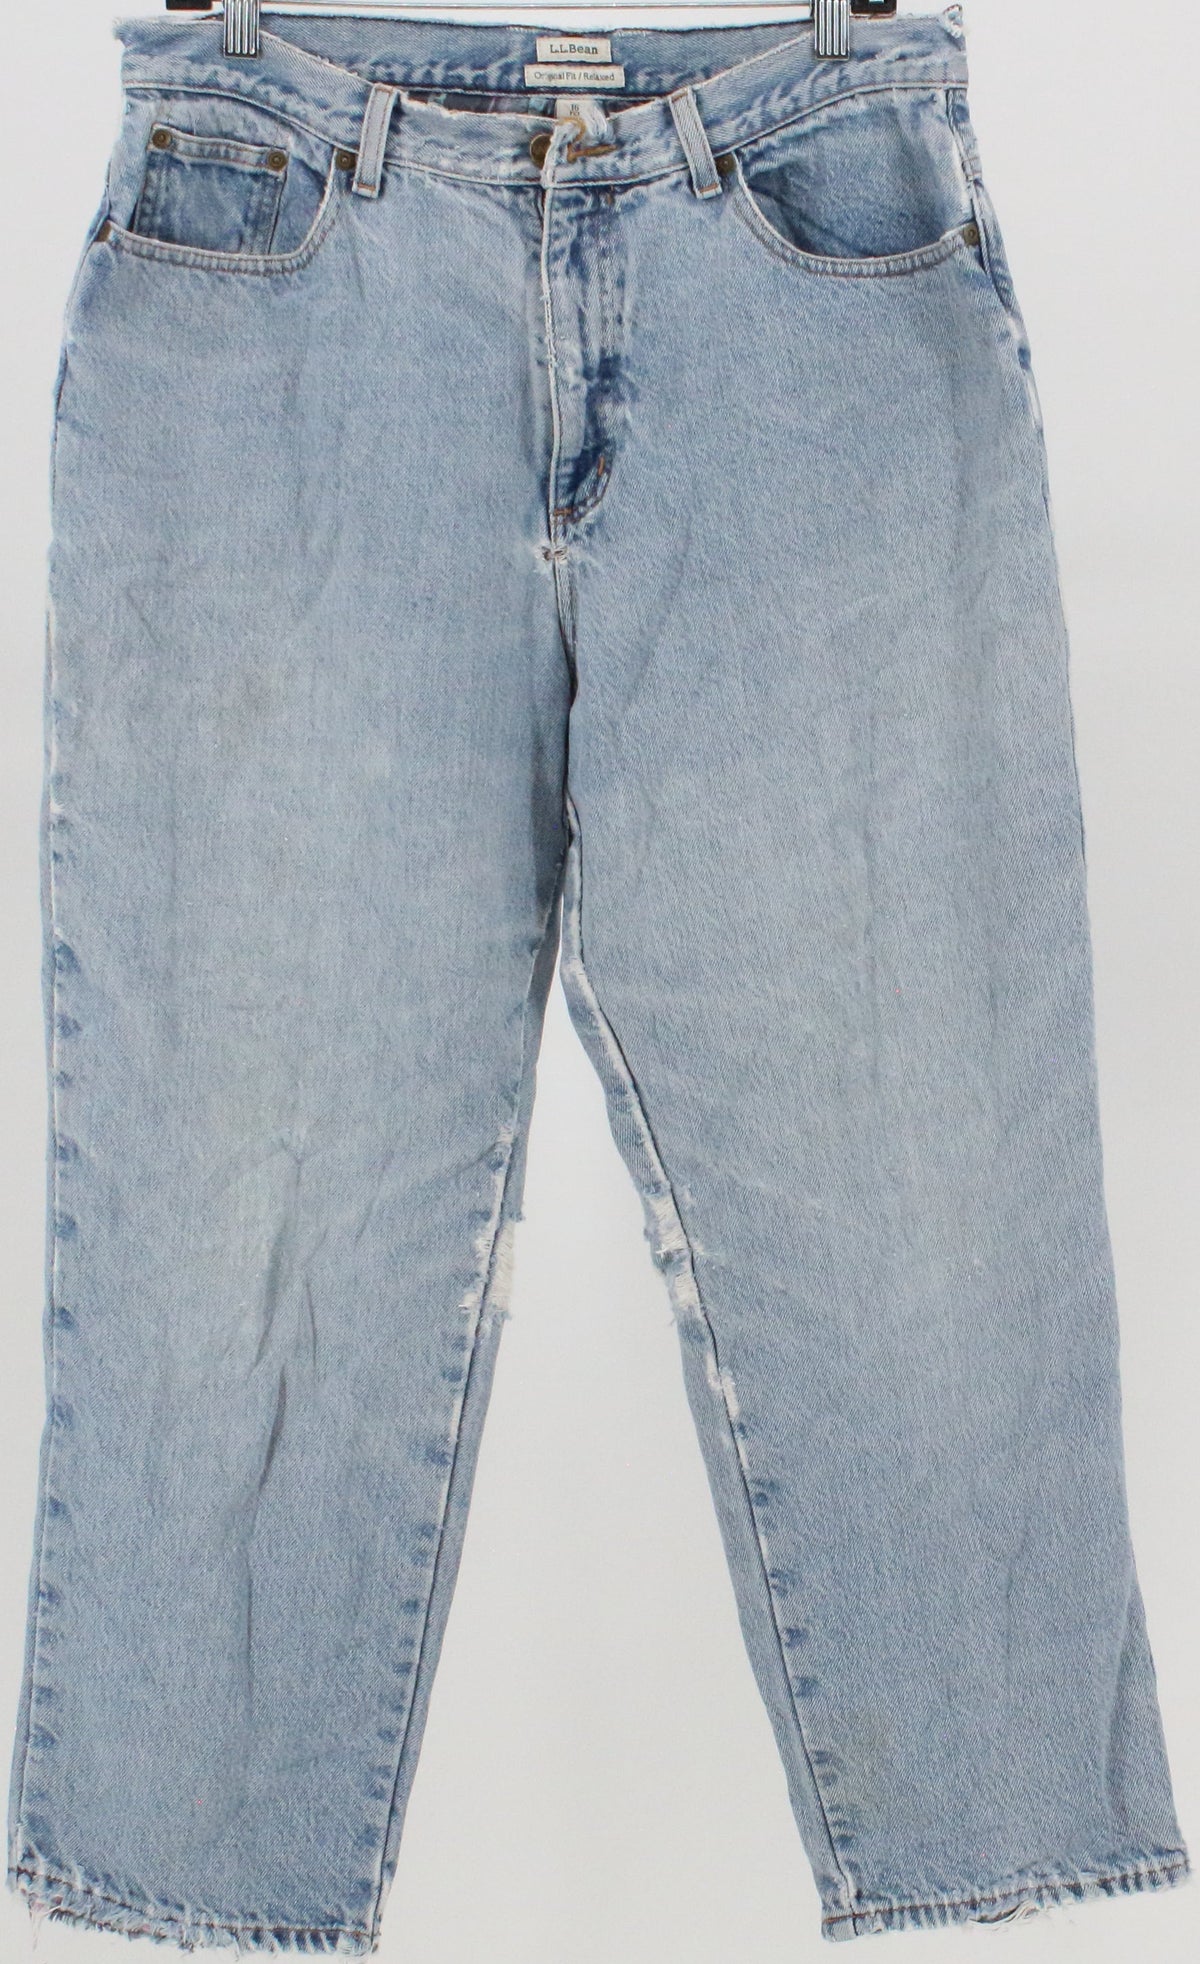 L.L.Bean Original Fit/Relaxed Light Blue Jeans With Plaid Lining